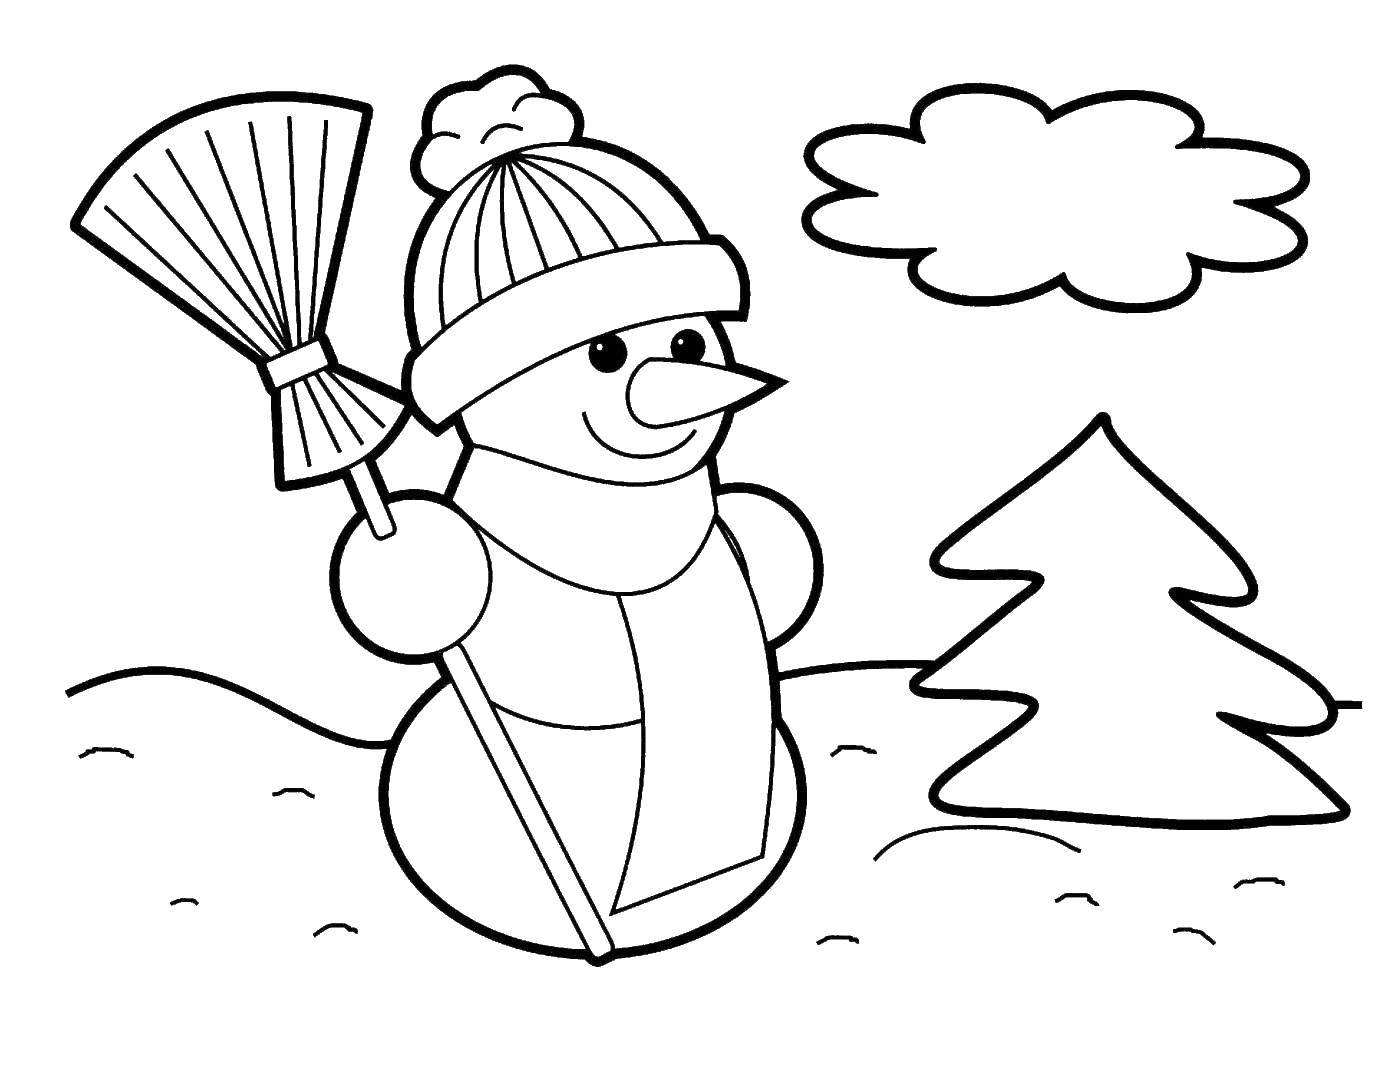 Coloring Snowman and Christmas tree. Category snowman. Tags:  snowman, broom, Christmas tree.